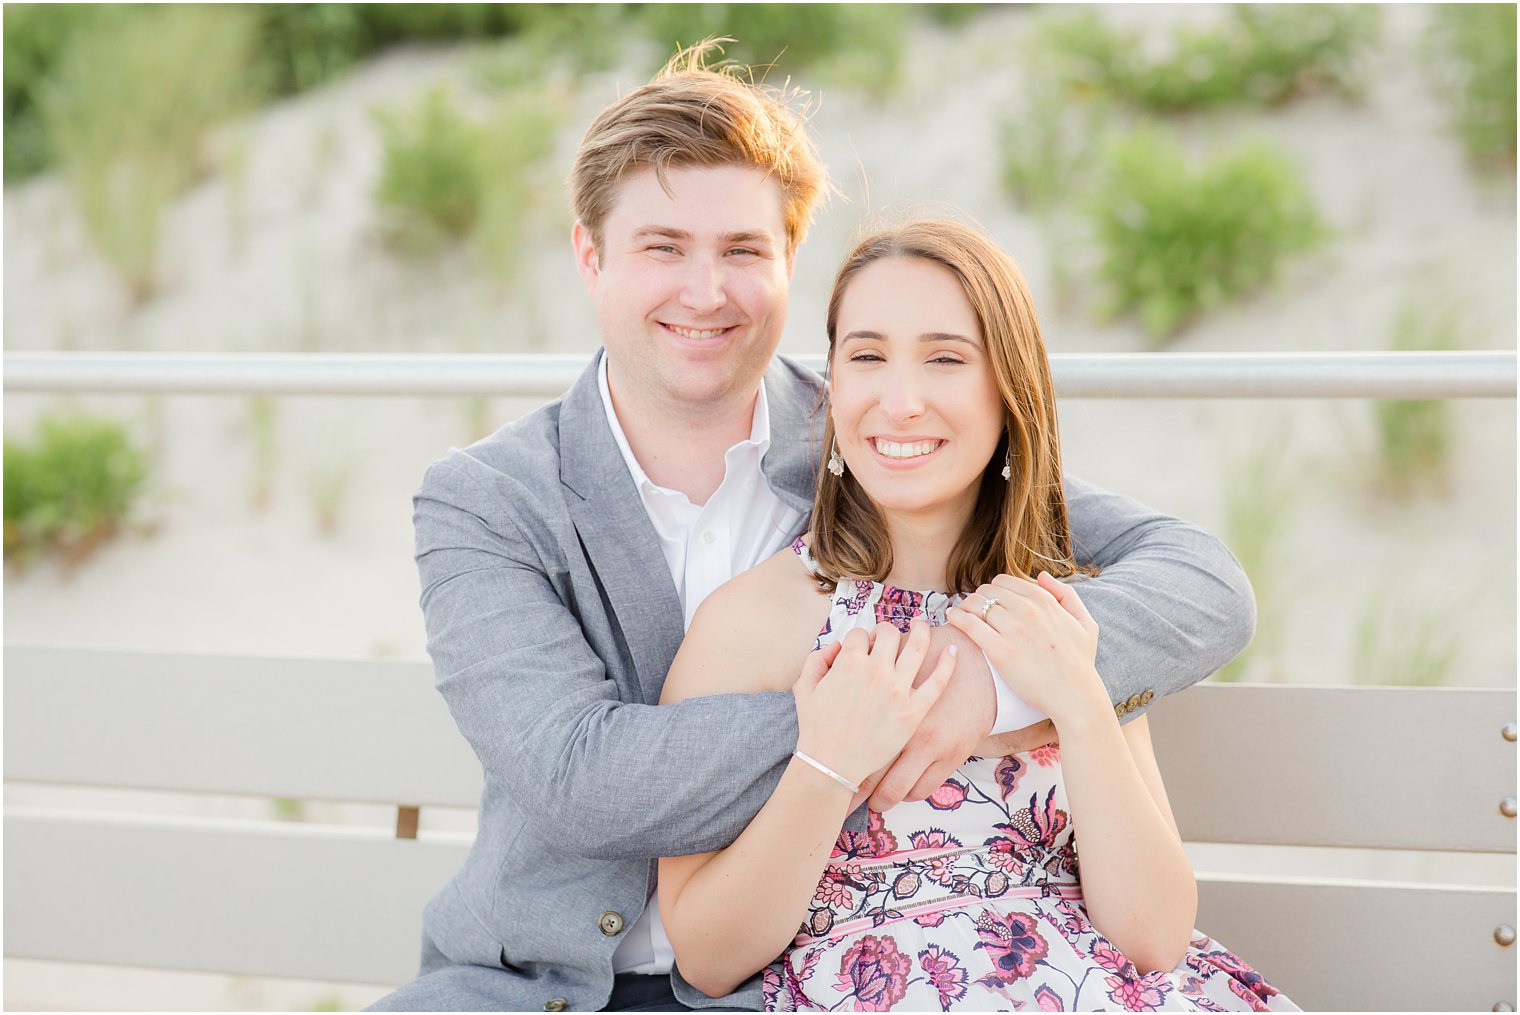 Golden hour engagement photos in Spring Lake